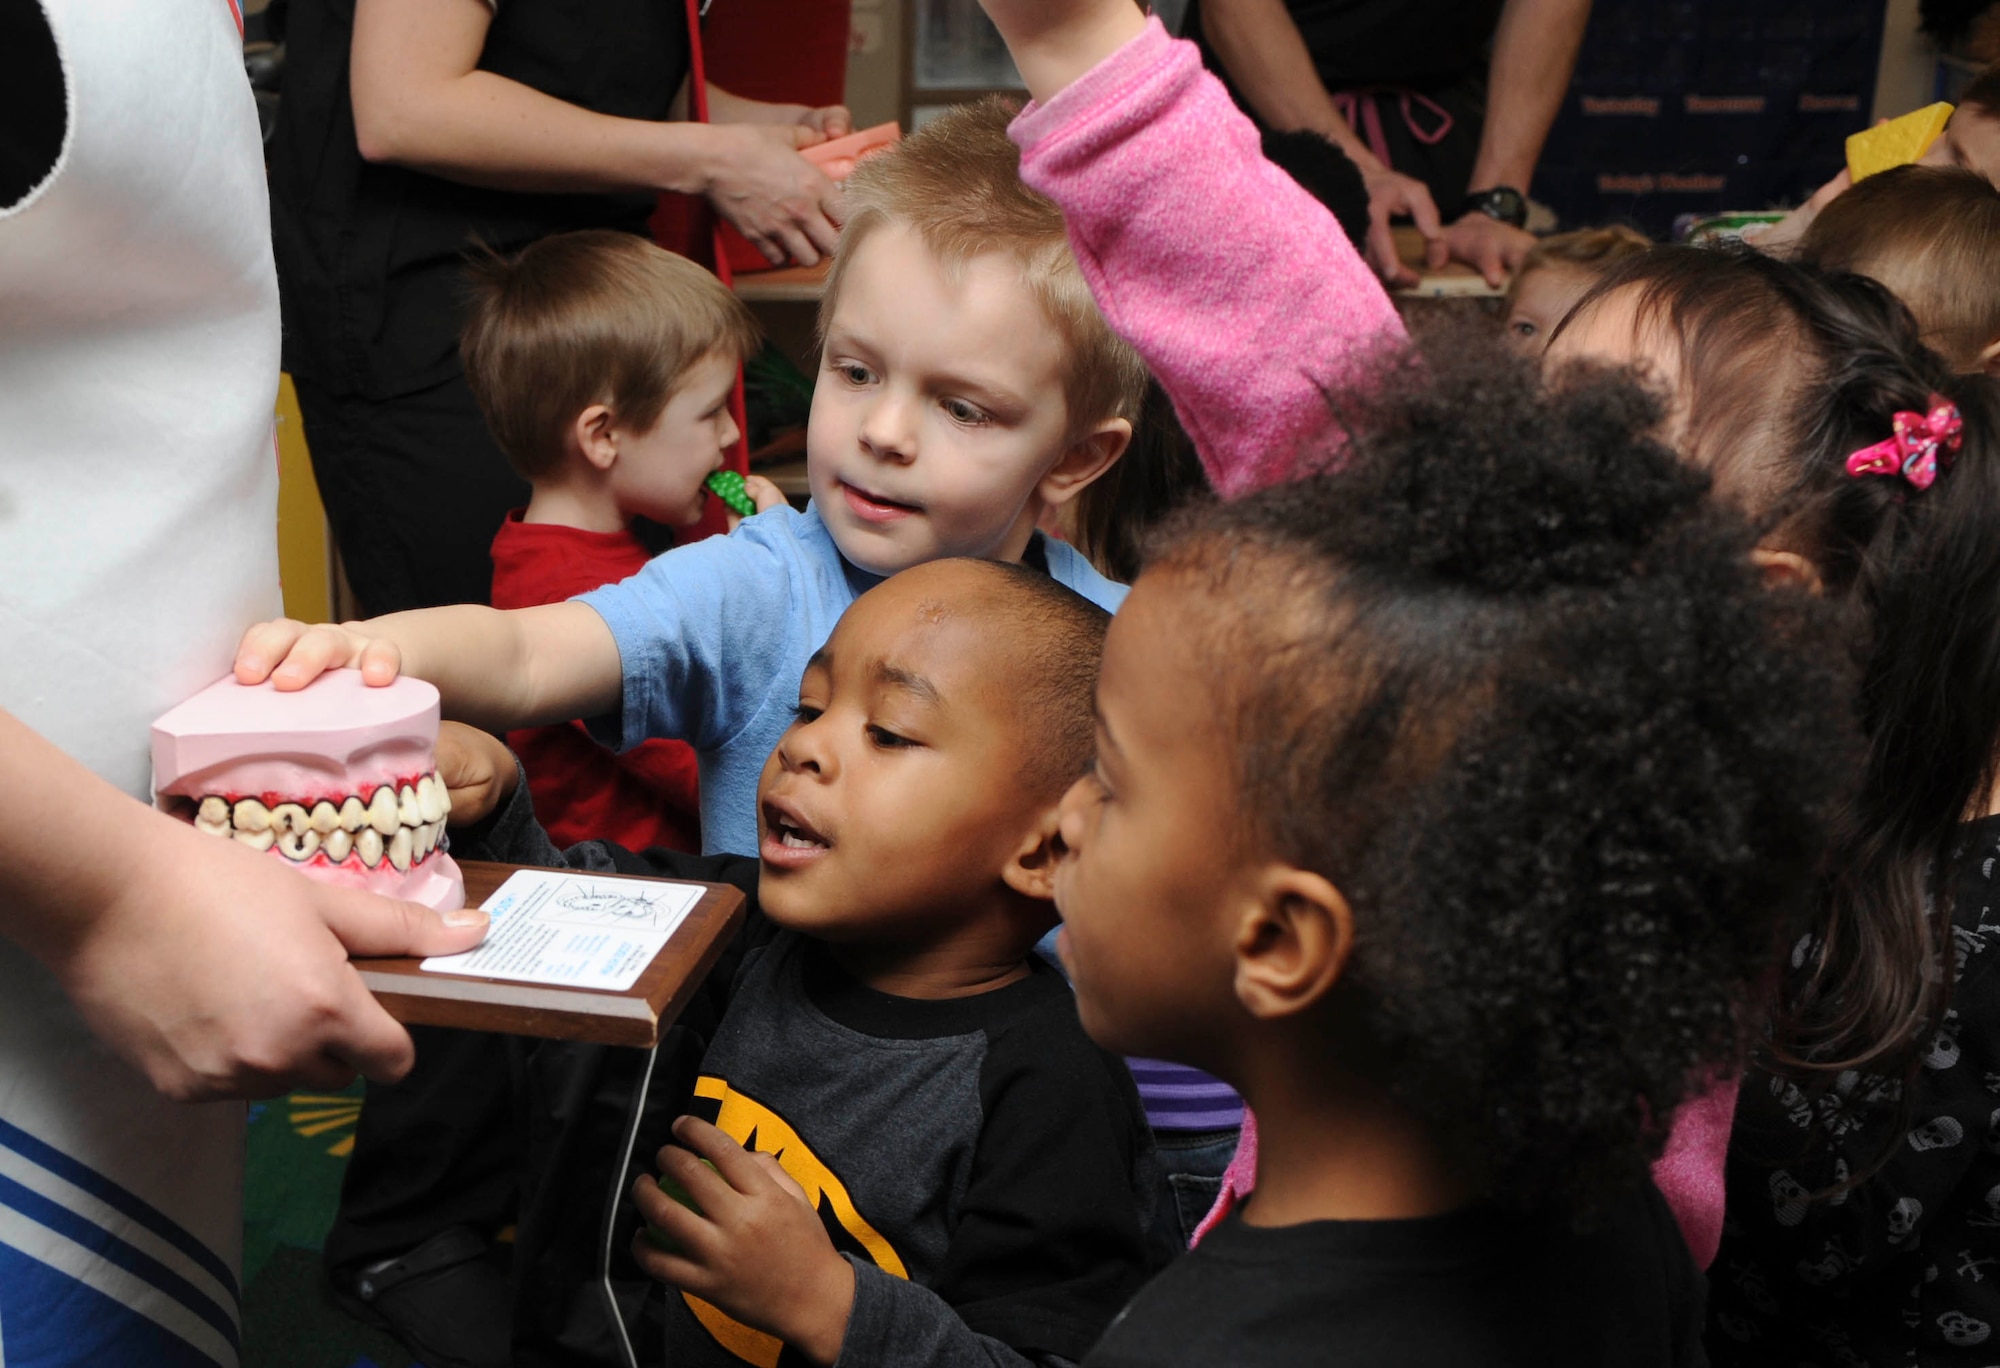 Four-year-old Marley Gilliam (center) and his fellow Child Development Center classmates examine a model of unhealthy teeth during the National Children’s Dental Health Month dental hygiene lesson put on by base dental professionals in the CDC at Ellsworth Air Force Base, S.D., Feb. 13, 2013. Staff used teeth displays to show the children what healthy and unhealthy teeth look like, and proper dental health care habits. (U.S. Air Force photo by Airman 1st Class Anania Tekurio/Released)  